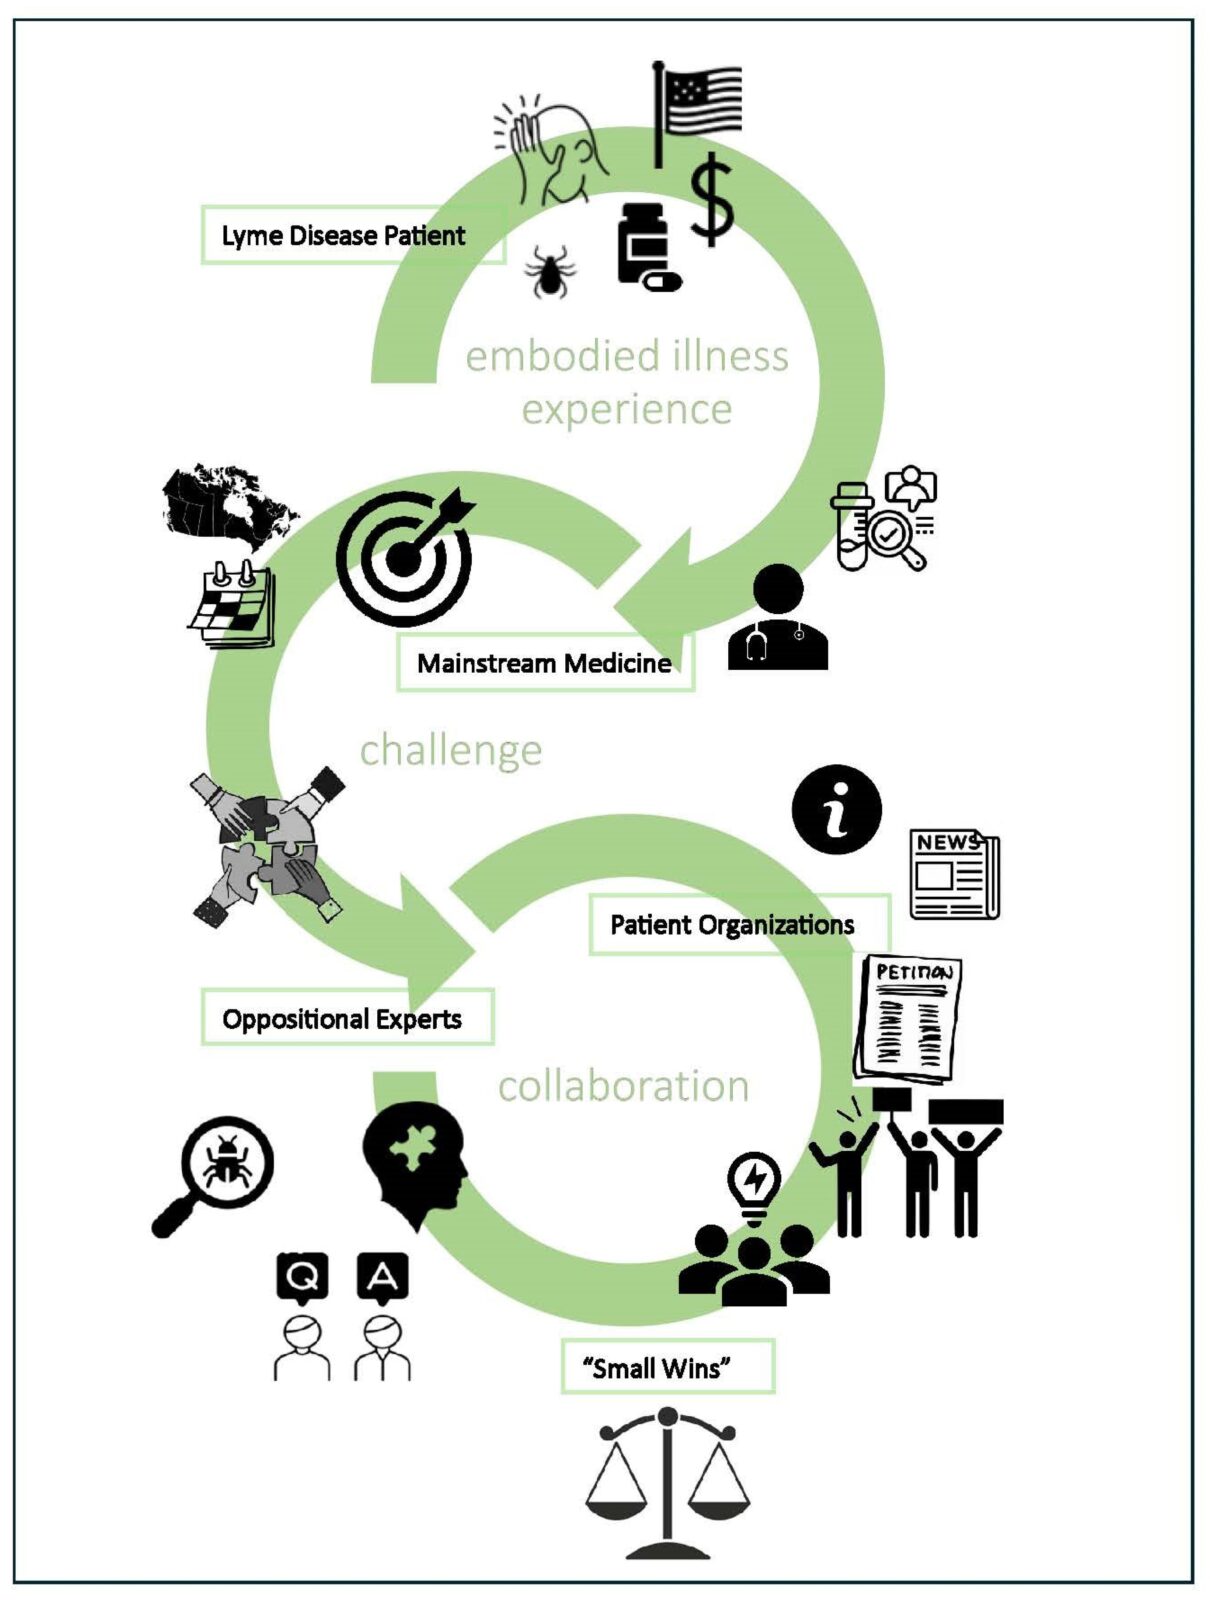 A graphical abstract showing the journey of Lyme patients to mainstream medicine and then to patient organizations and then "small wins" and "oppositional experts".